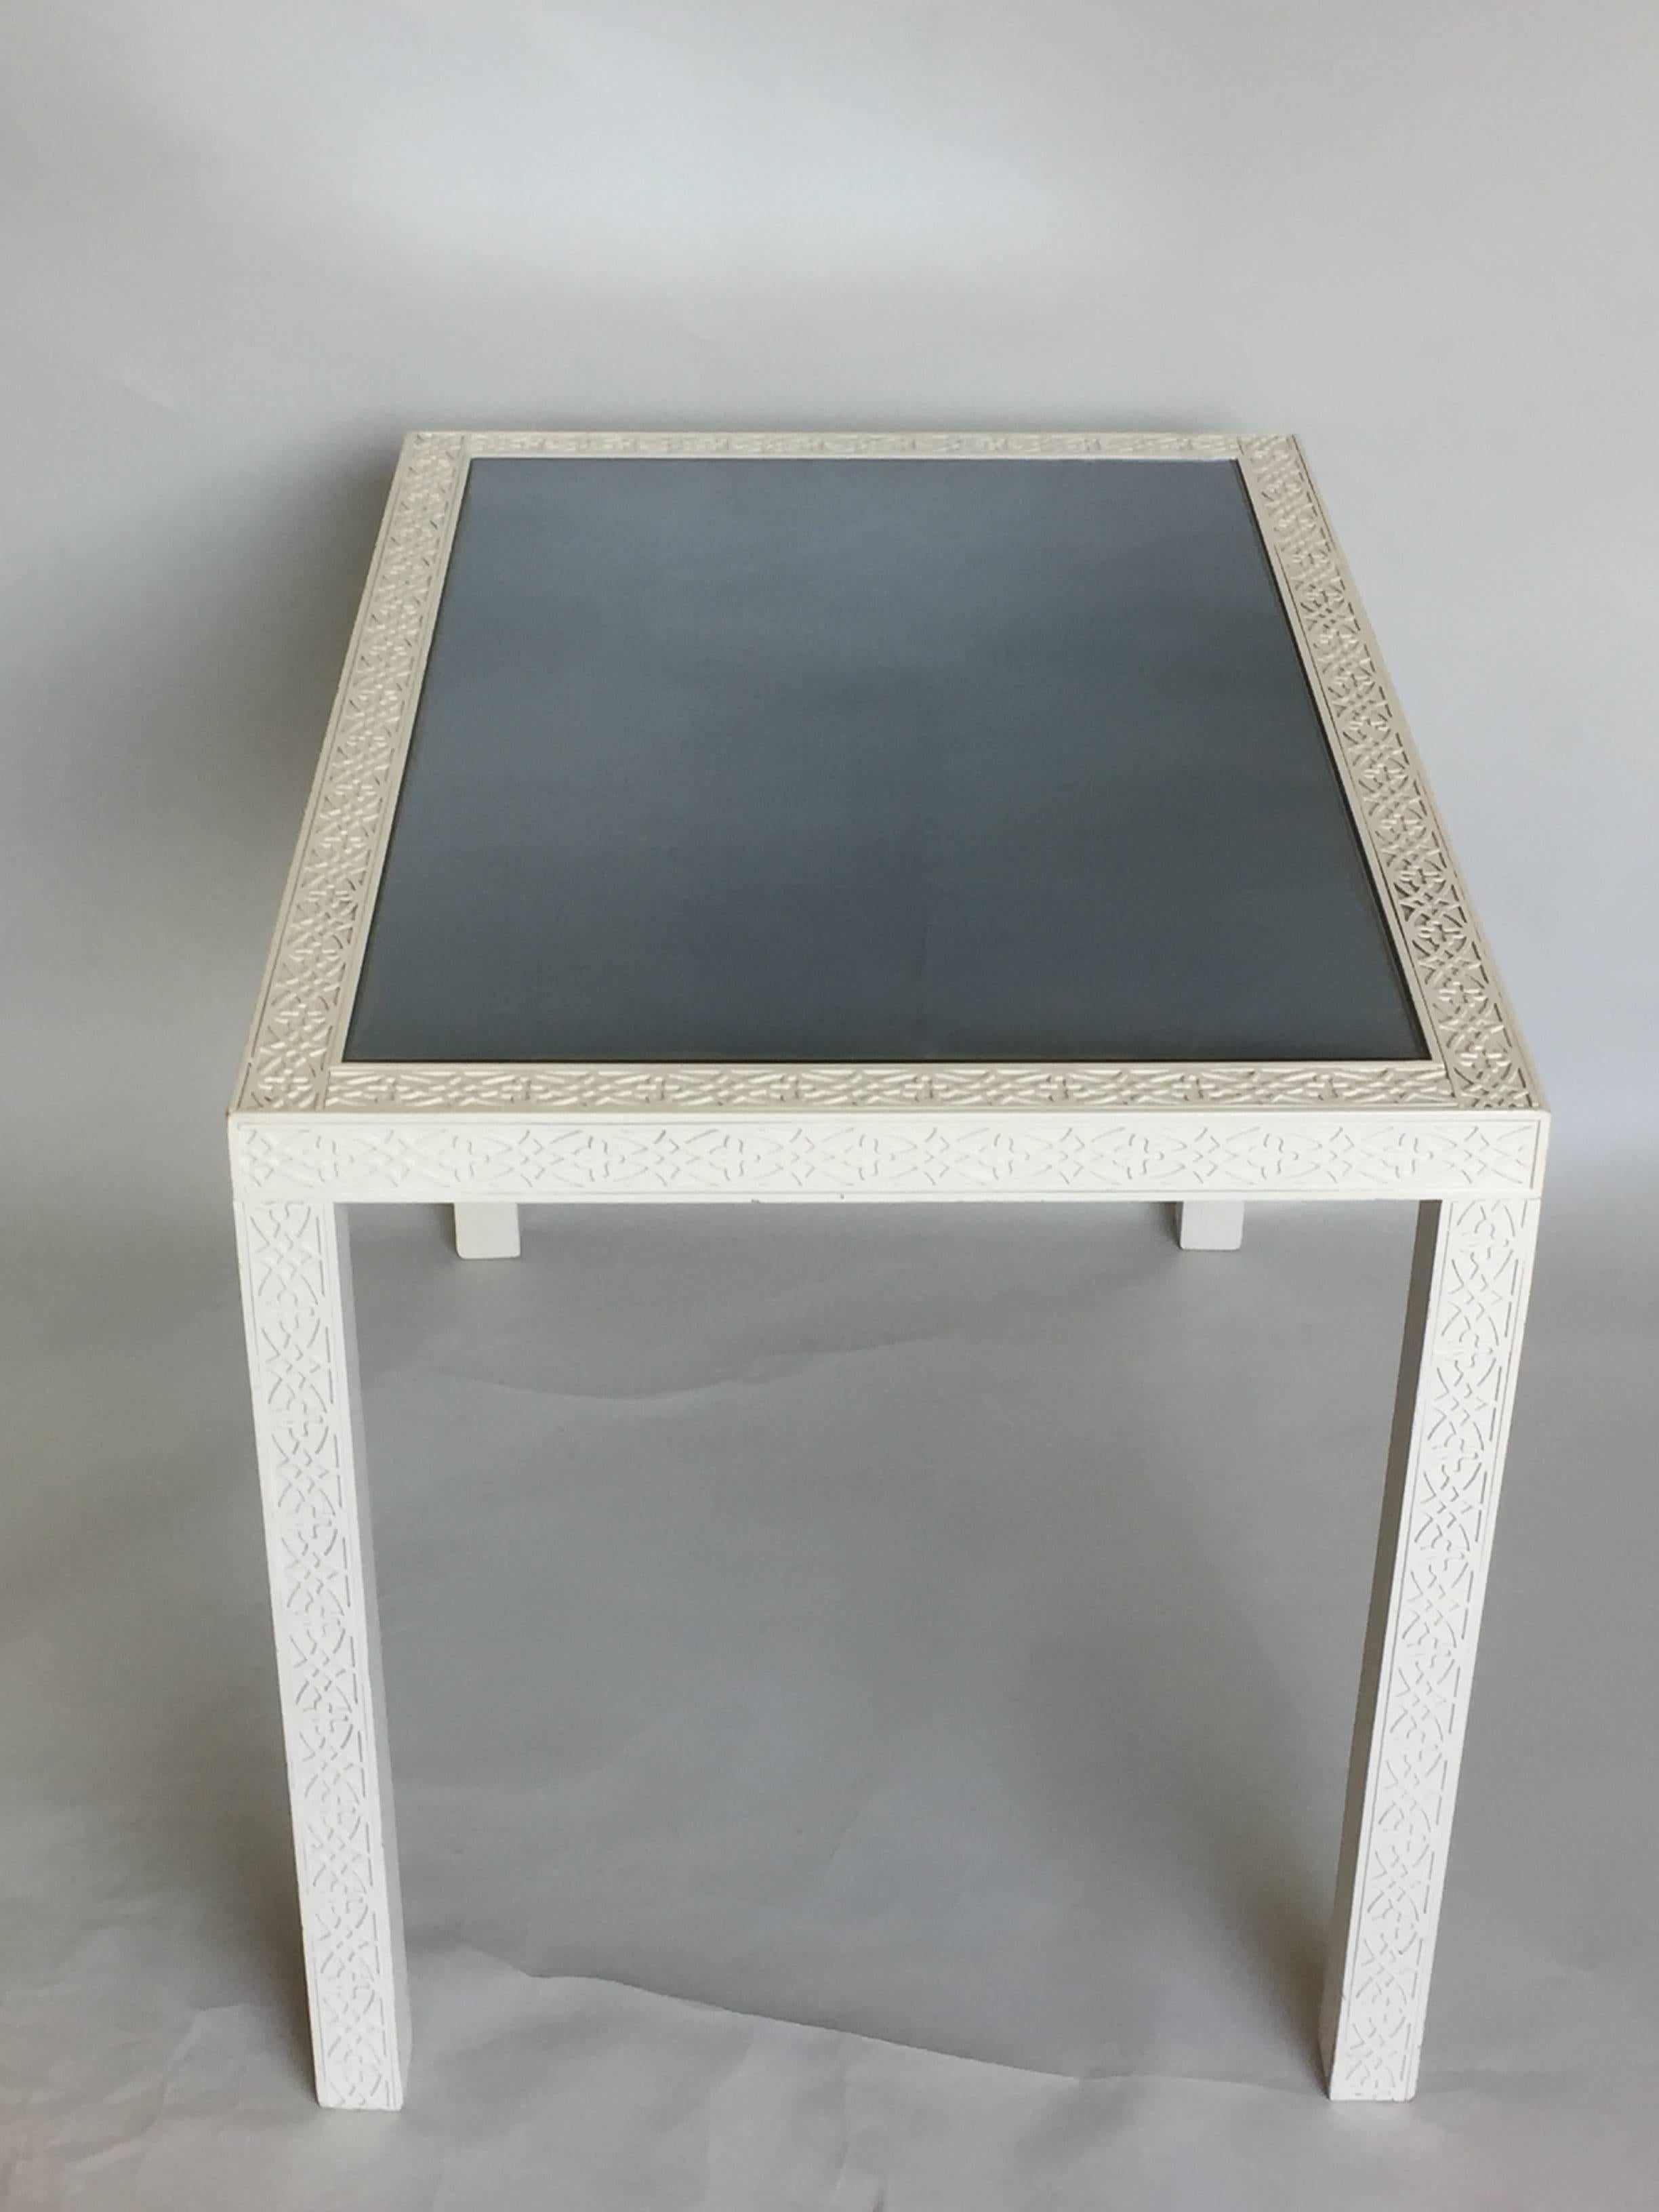 Elegant white Chinese Chippendale style end table or side table with decorative blind fretwork base and original mirrored top.